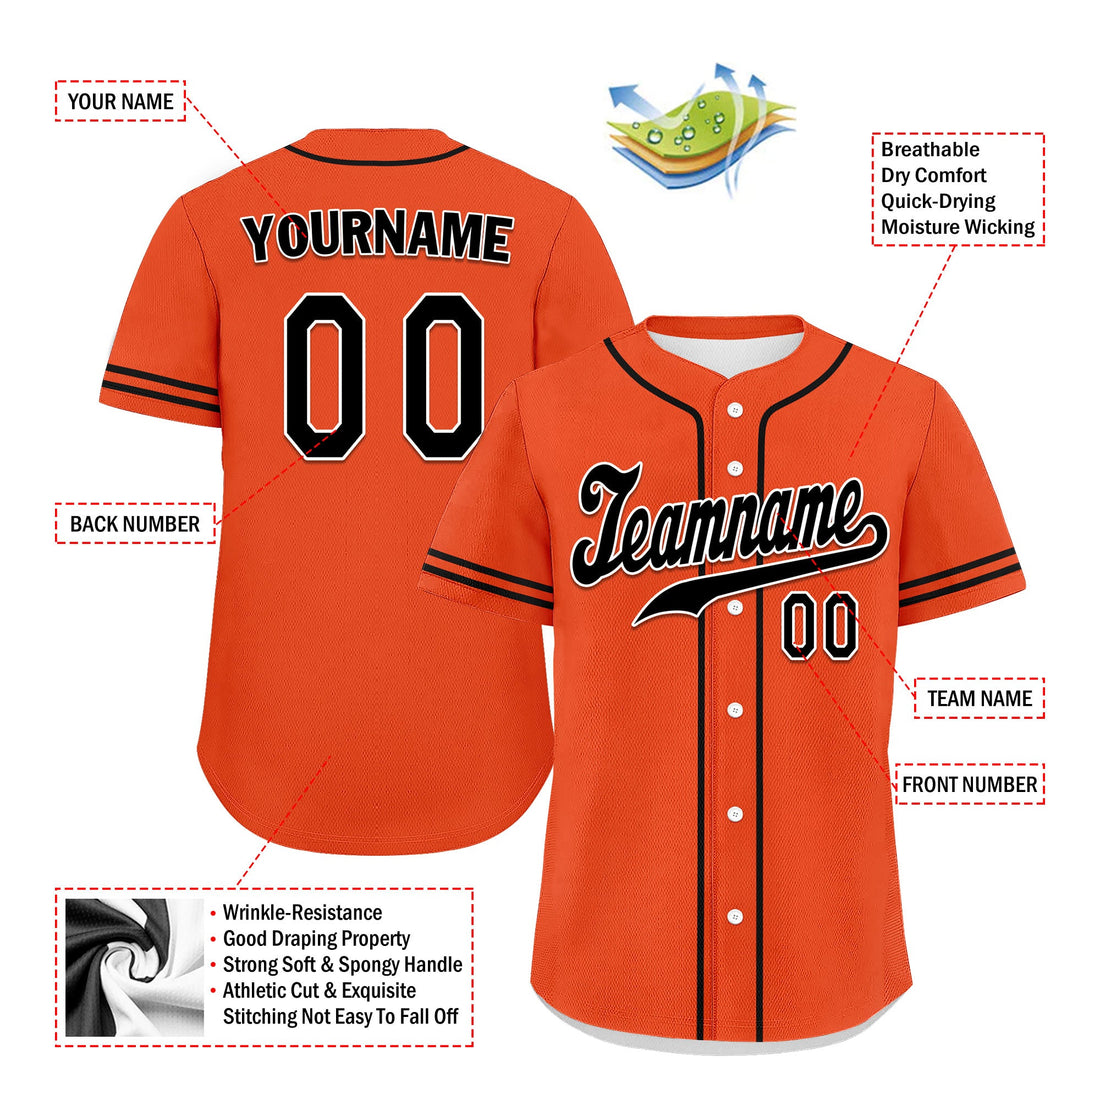 Custom Red Classic Style Black Personalized Authentic Baseball Jersey UN002-bd0b00d8-b0